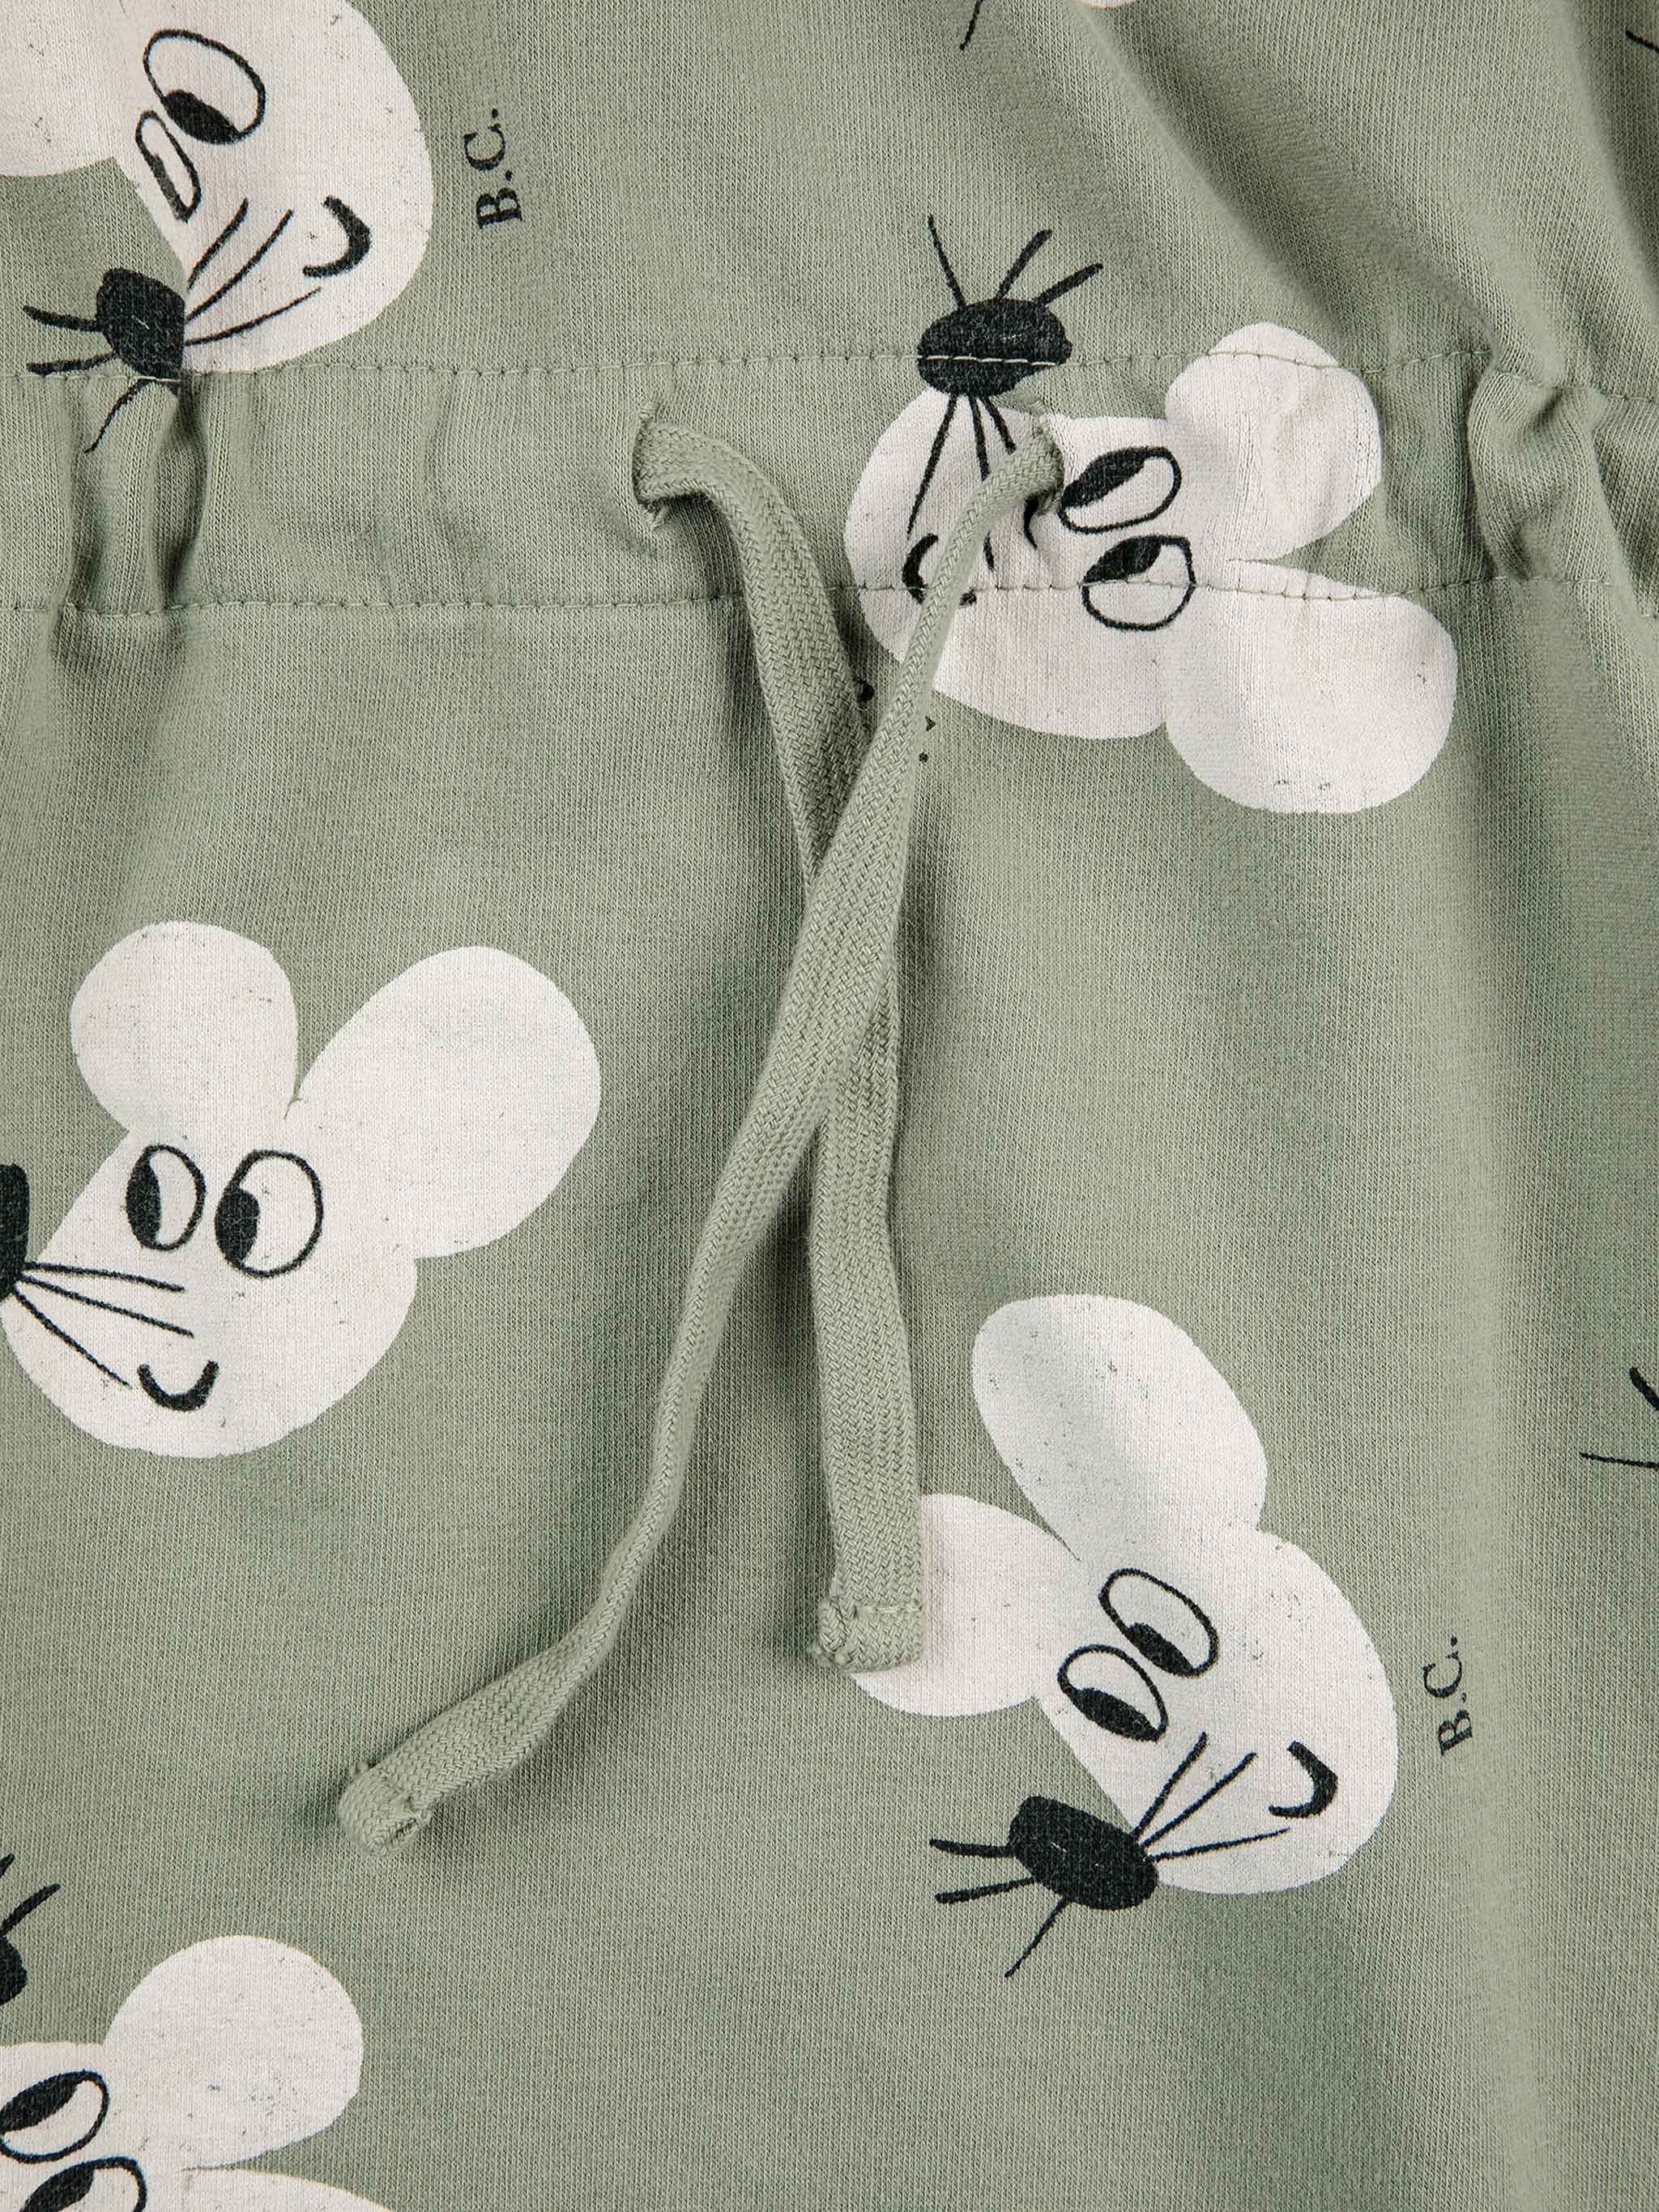 Mouse all over dress – Bobo Choses